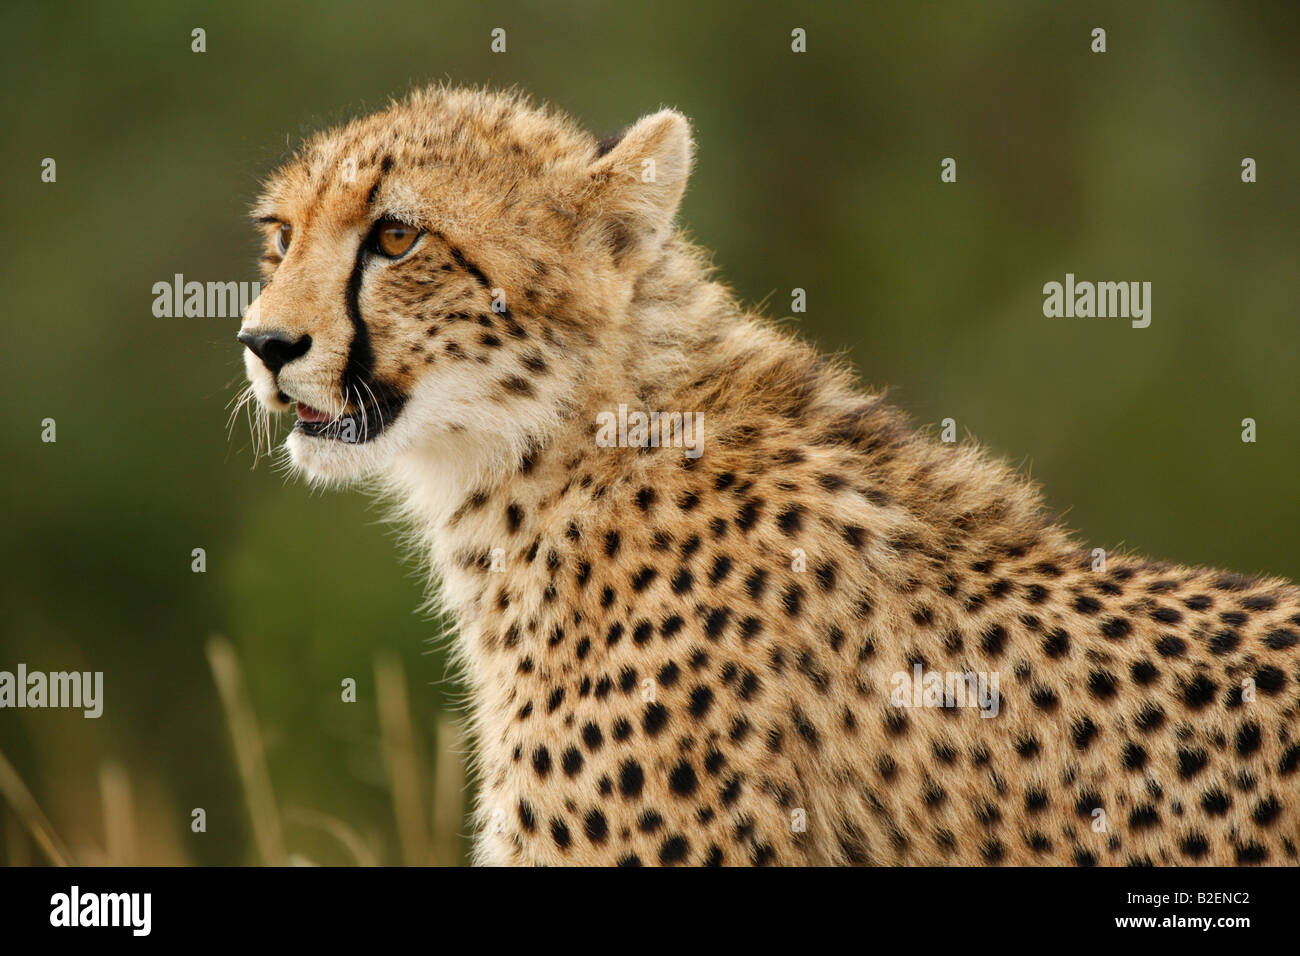 Portrait of a sub-adult cheetah with open mouth looking alert Stock Photo